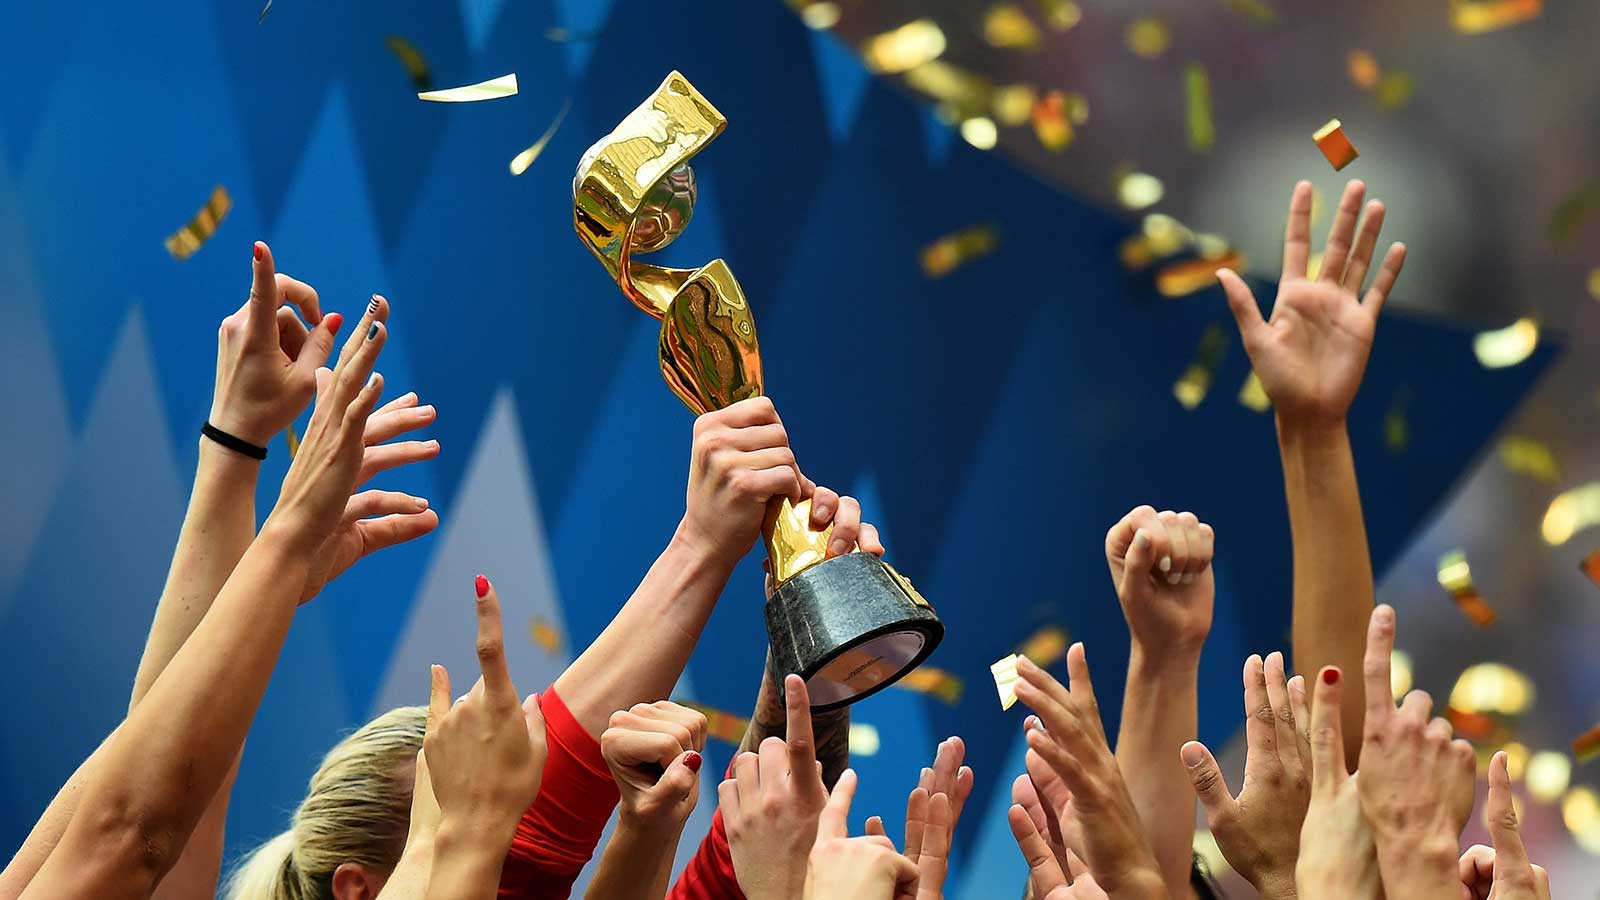 Women’s world cup trophy being held up in the air